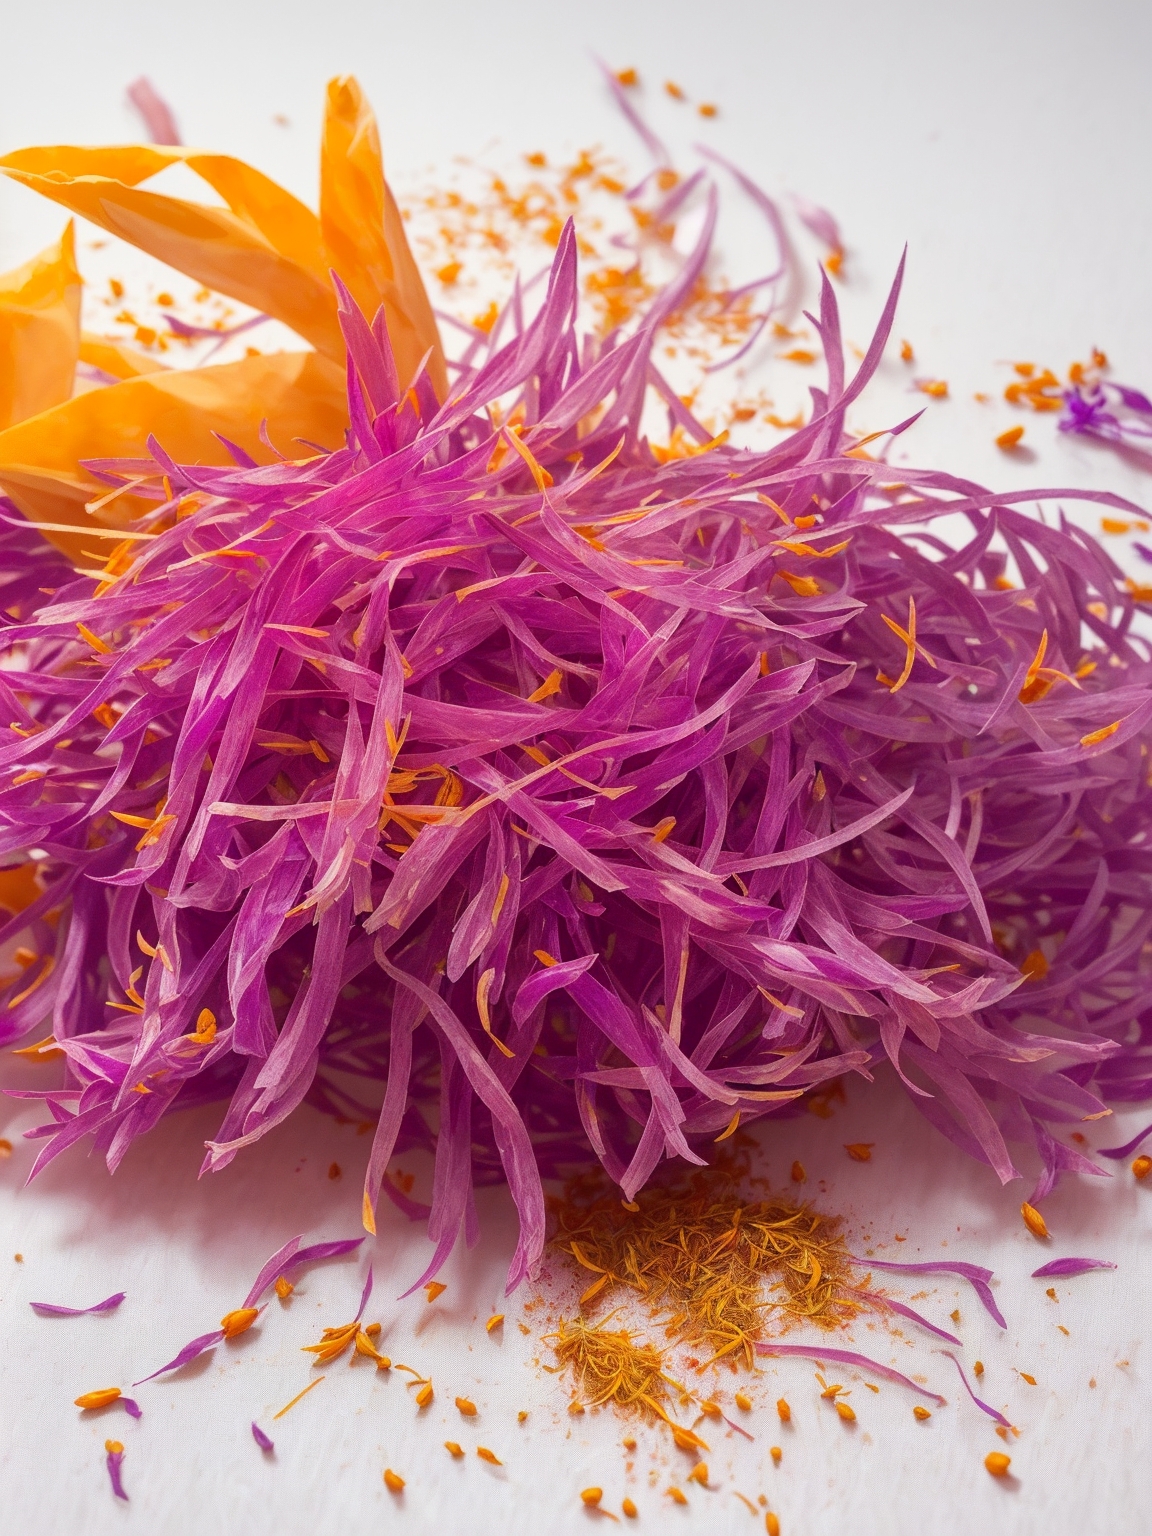 what are the benefits of saffron for health...